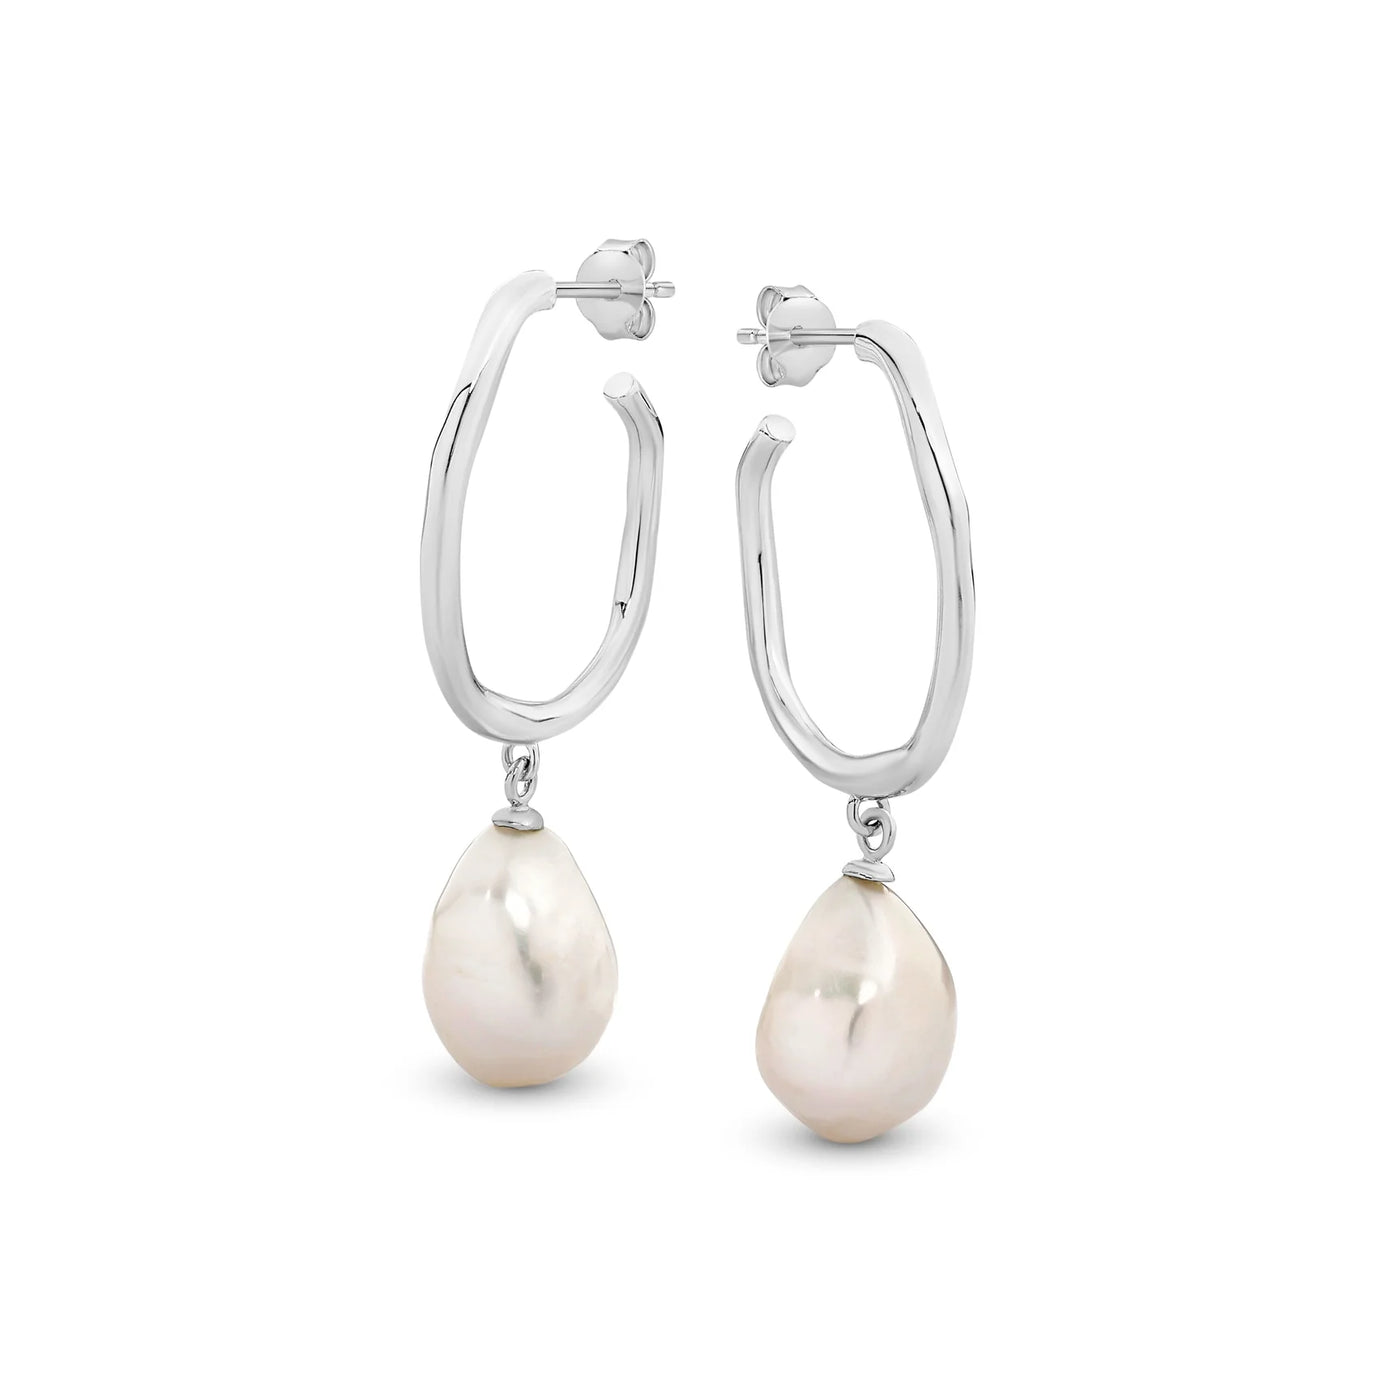 Sterling silver hoops with fixed Baroque Pearl